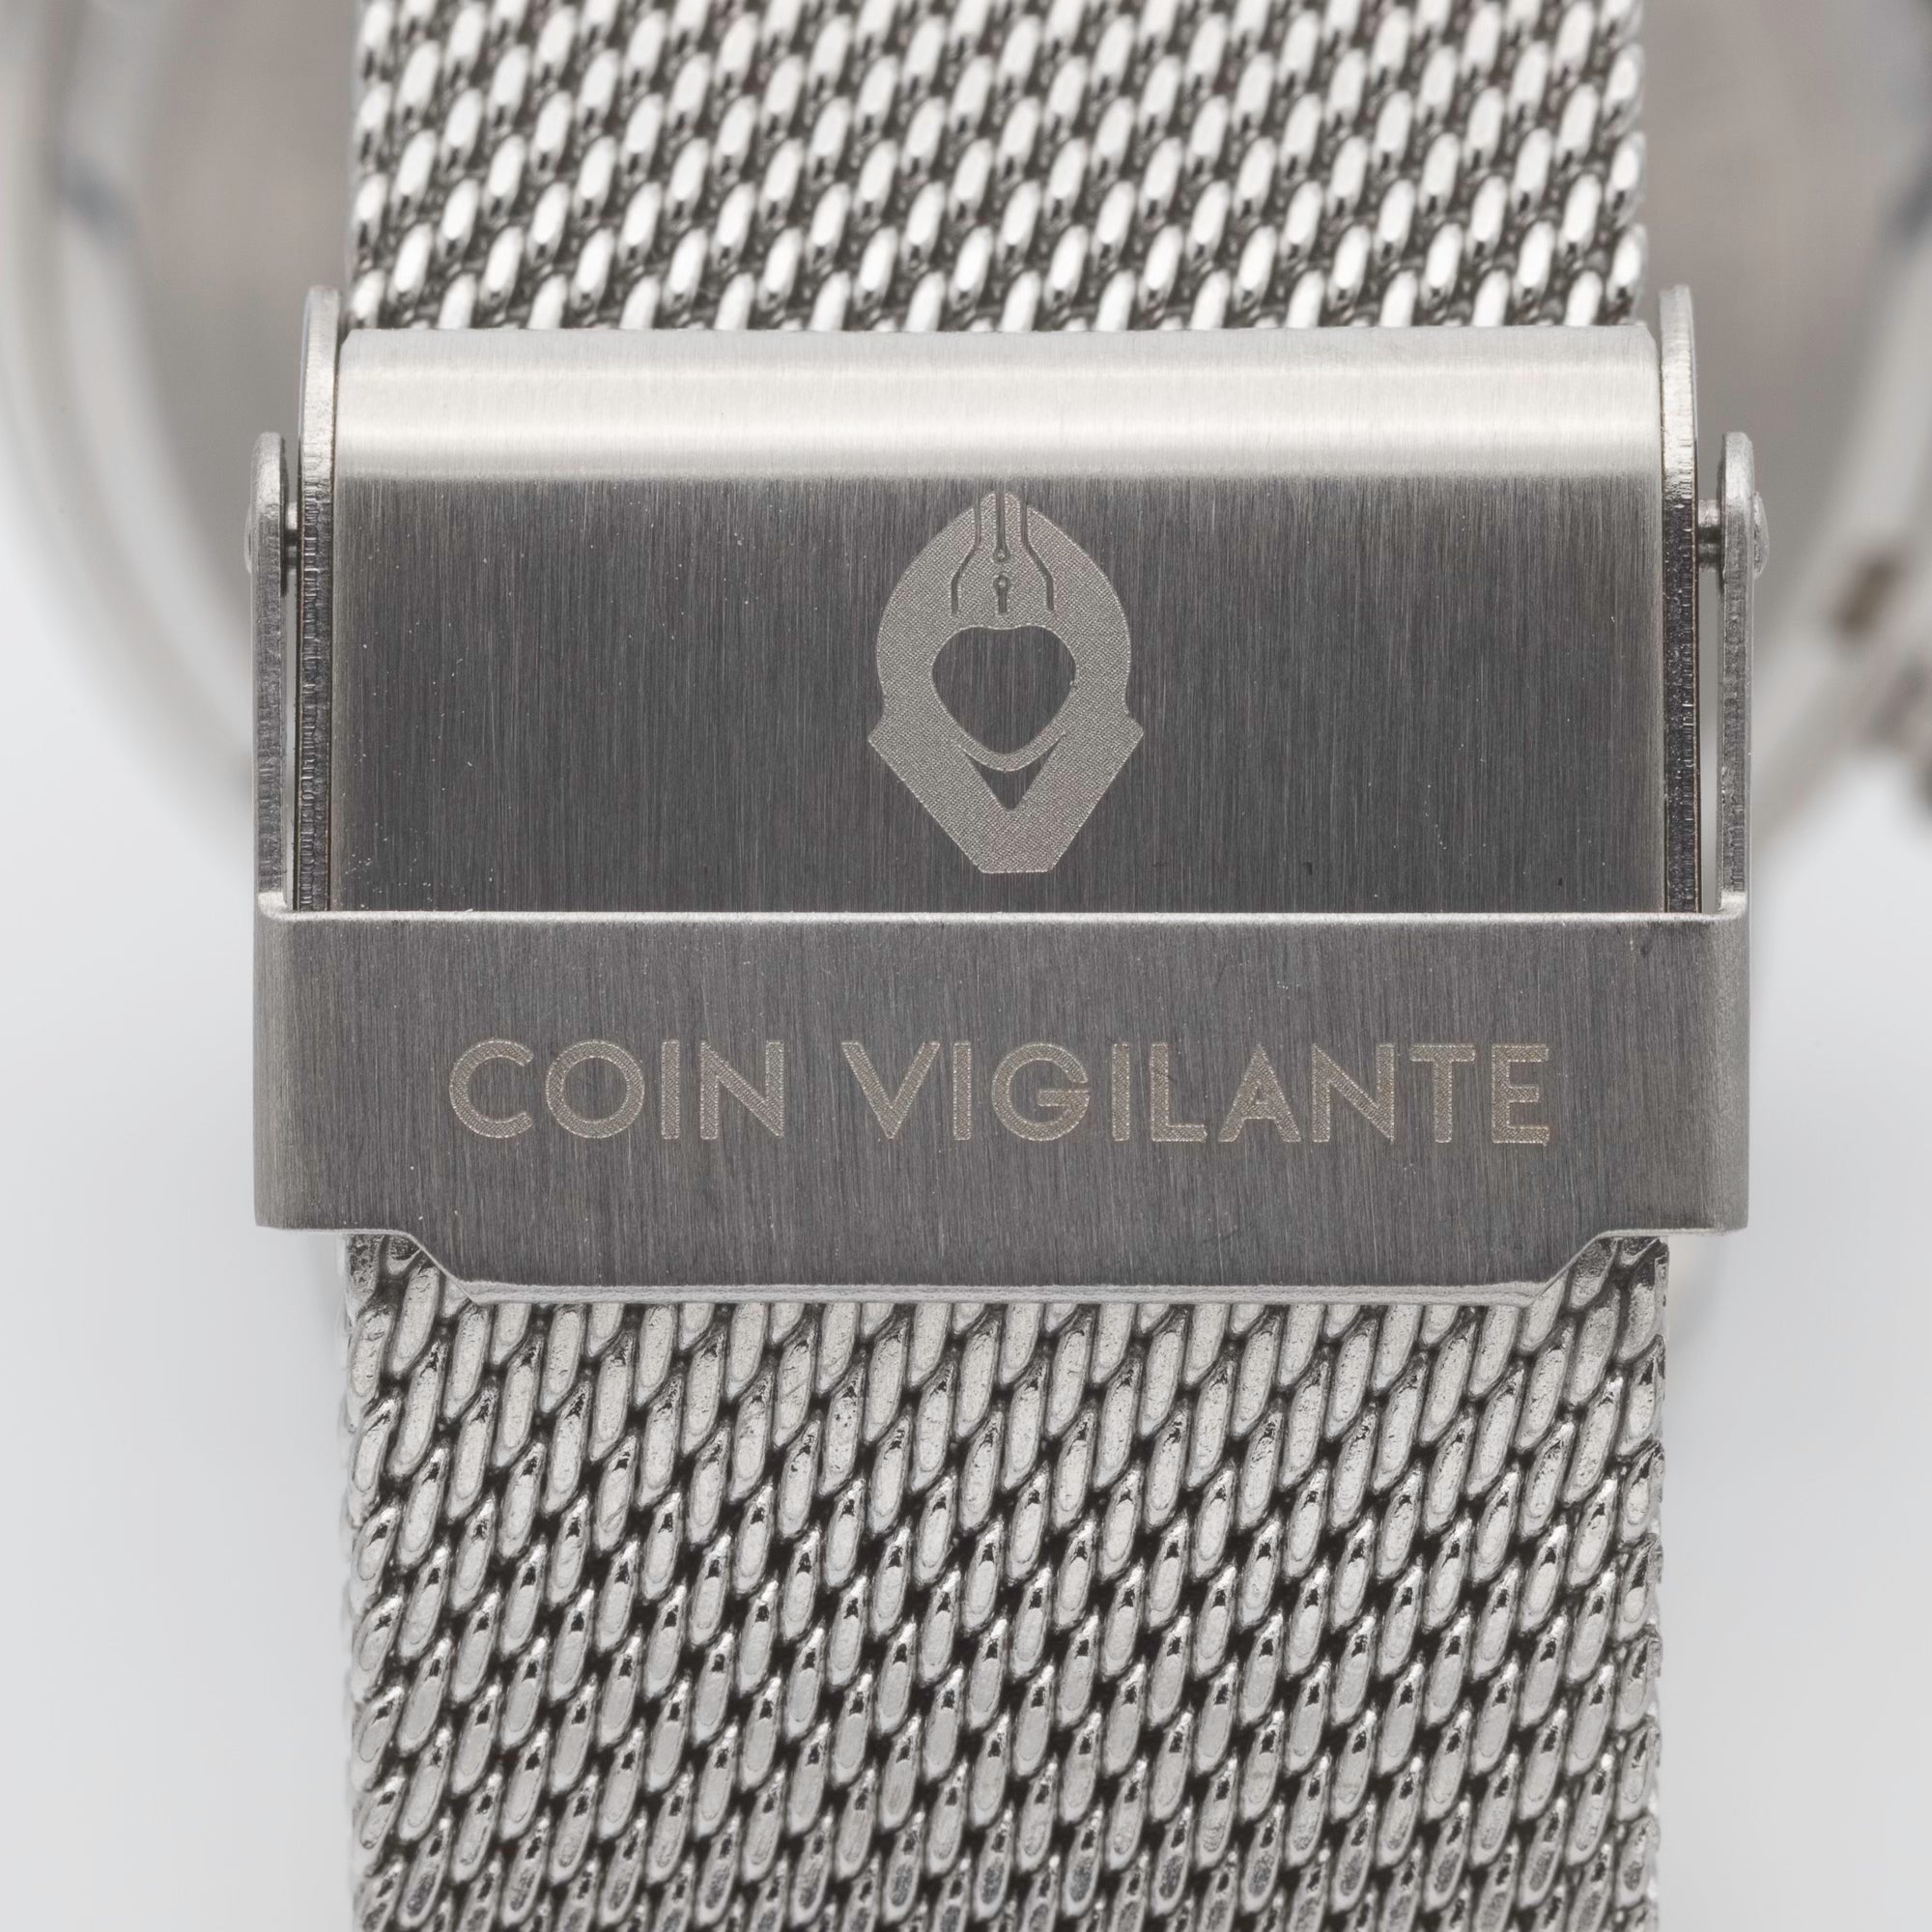 Experience Elegance: Coin Vigilante's 22MM Silver Stainless Steel Mesh Band